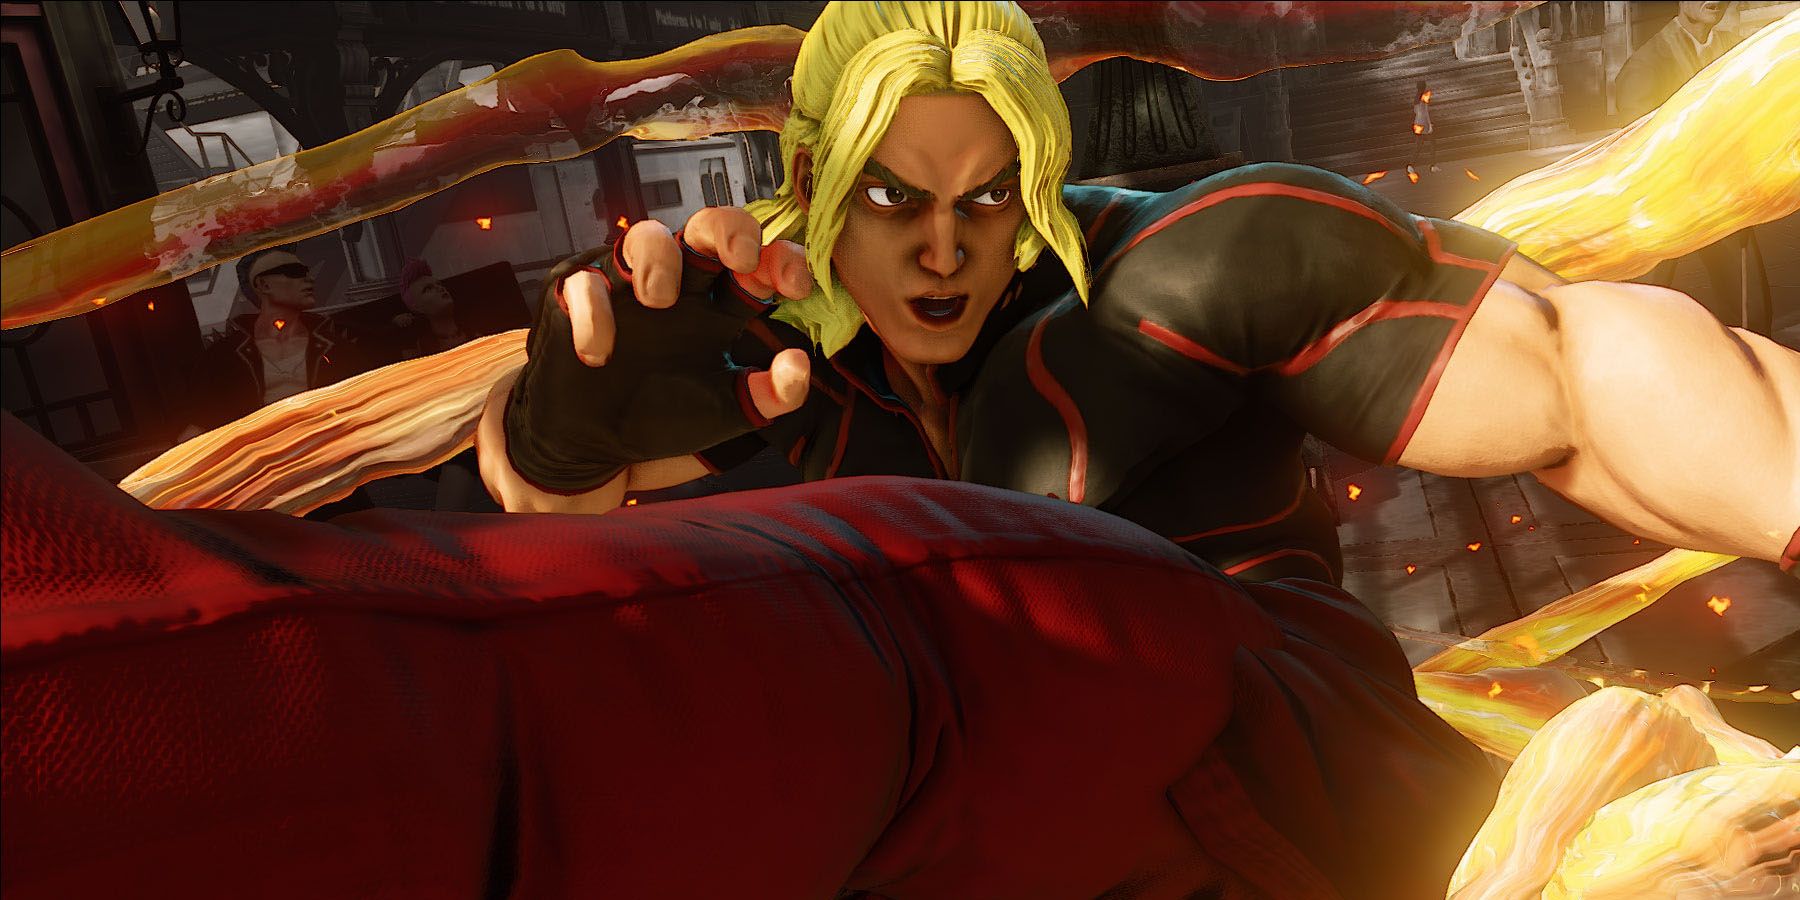 Street Fighter: 15 Most Overpowered Characters, According To Lore